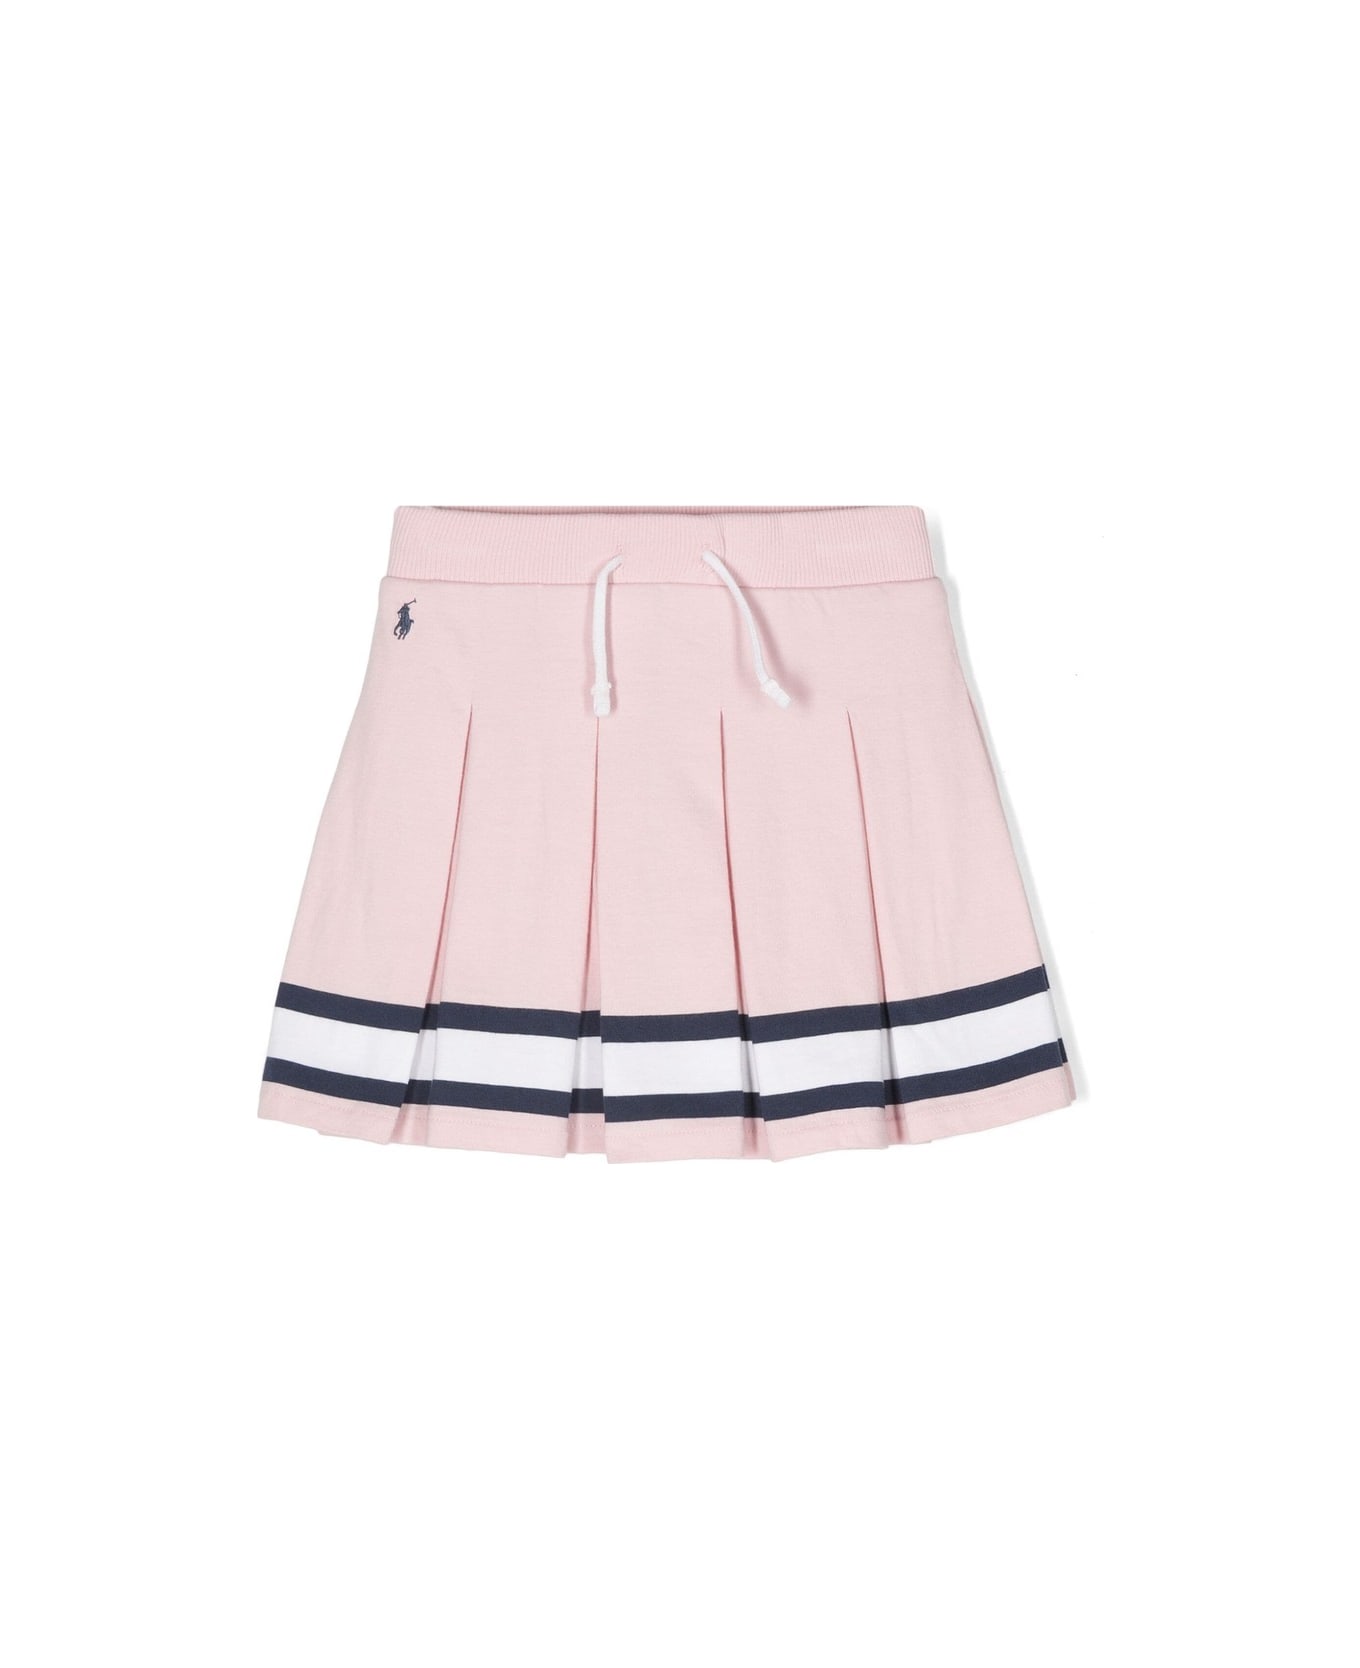 Ralph Lauren Pink Pleated Mini Skirt With Striped Pattern - Pink